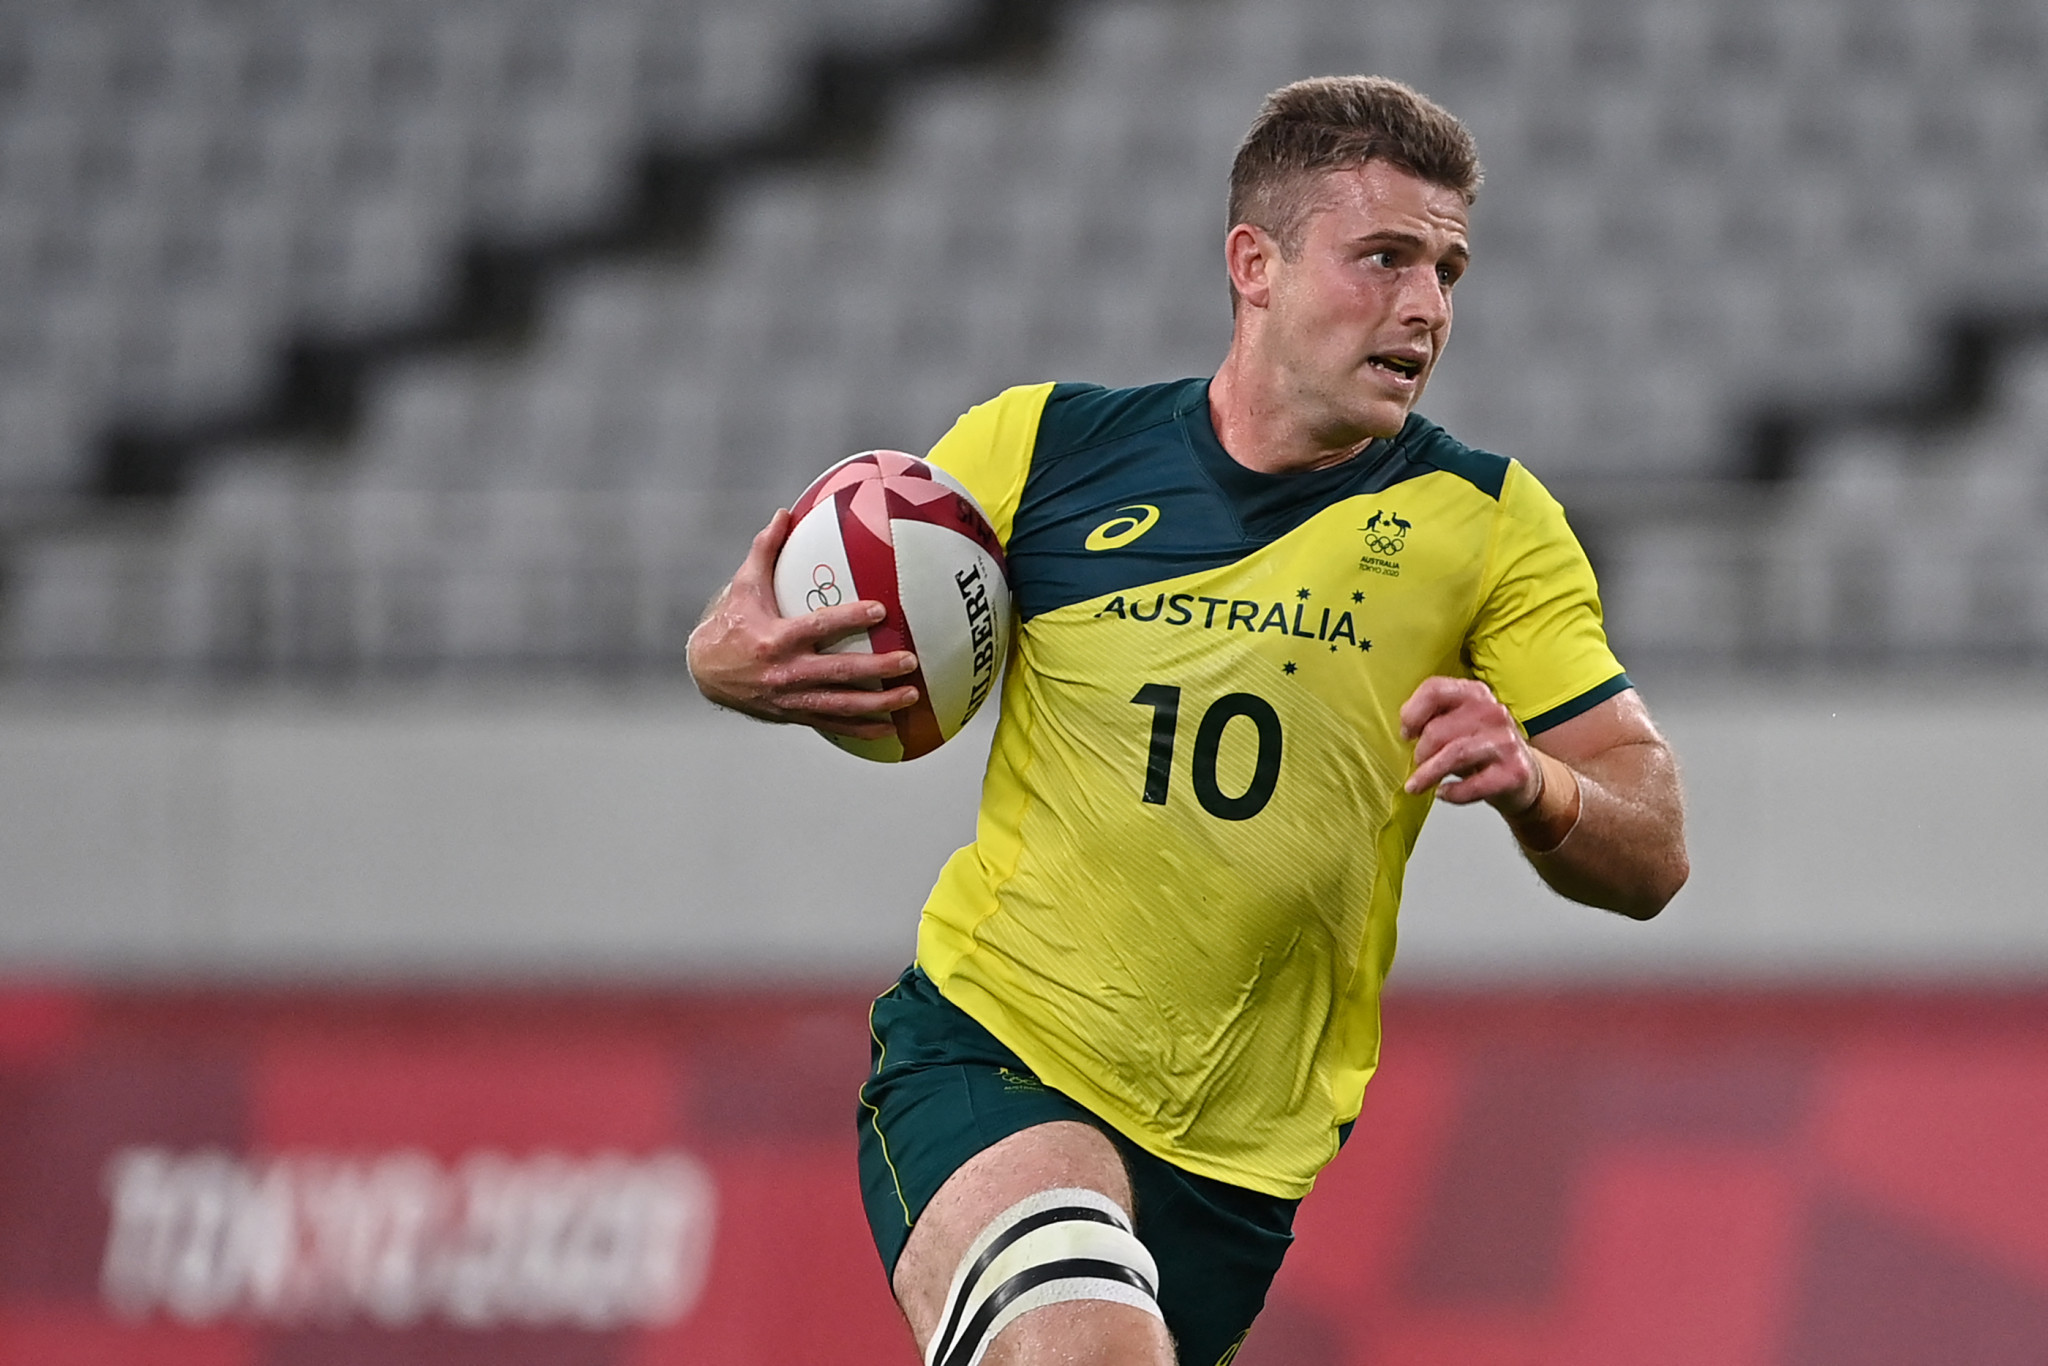 Australia triumph in London to force title-deciding leg in World Rugby Sevens Series